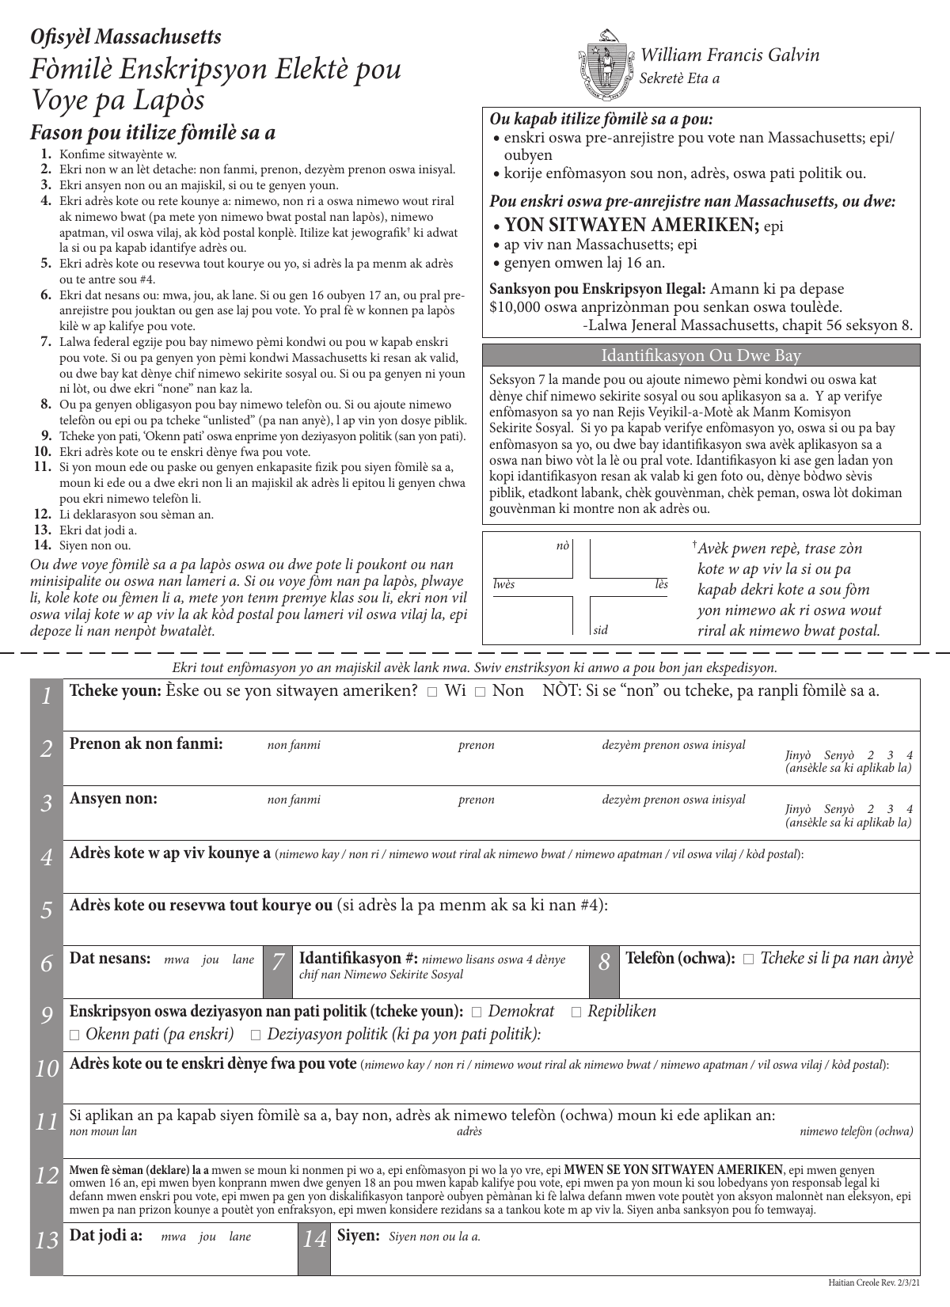 Mail-In Voter Registration Form - Massachusetts (Haitian Creole), Page 1